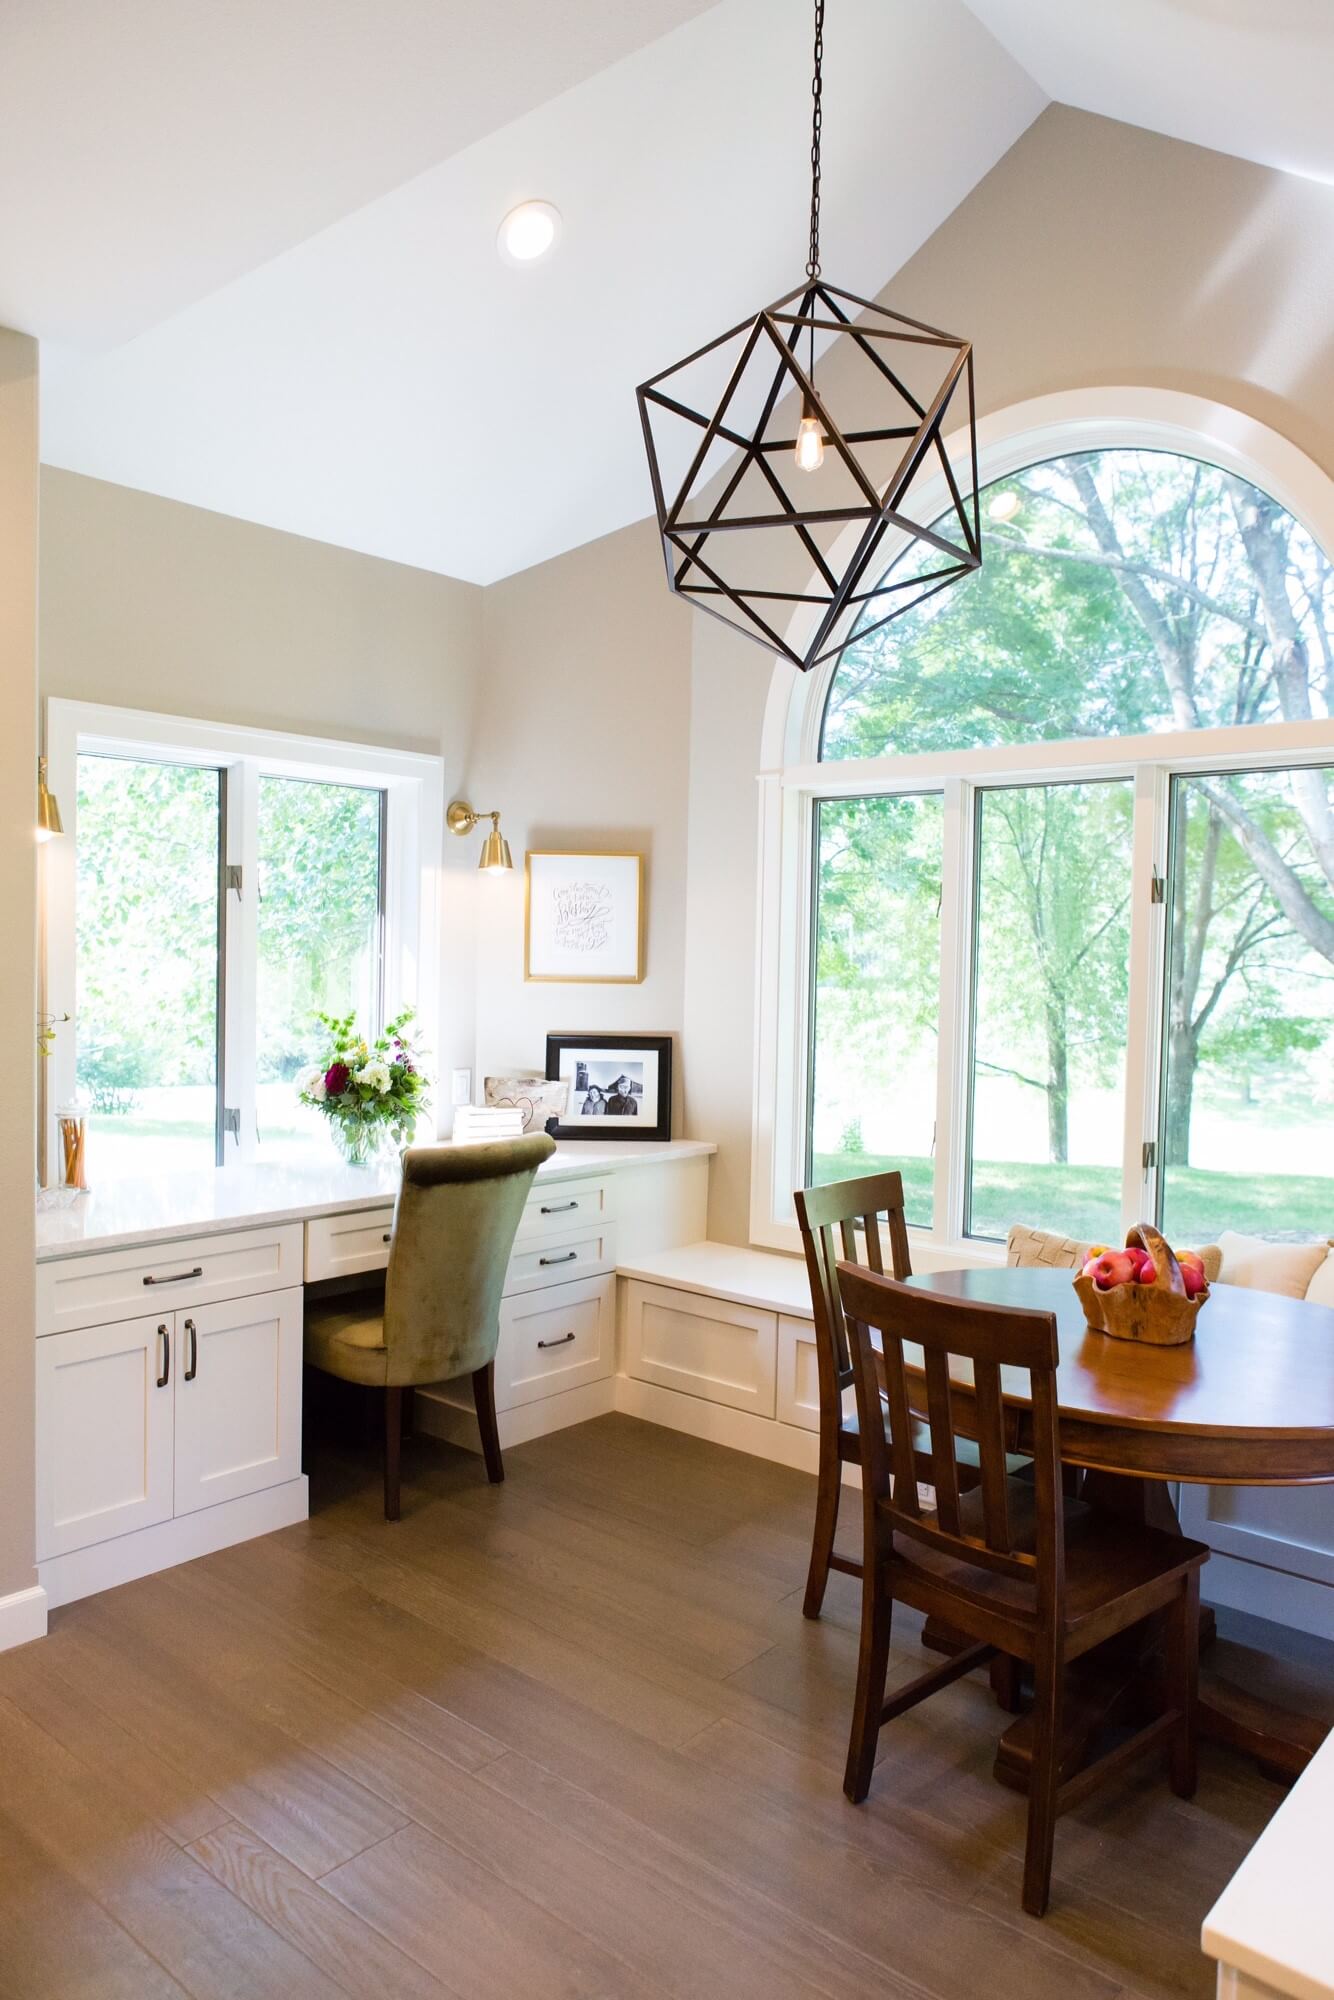 Kitchen with desk, designed by Megan Courtney of Cabinet Style LLC.